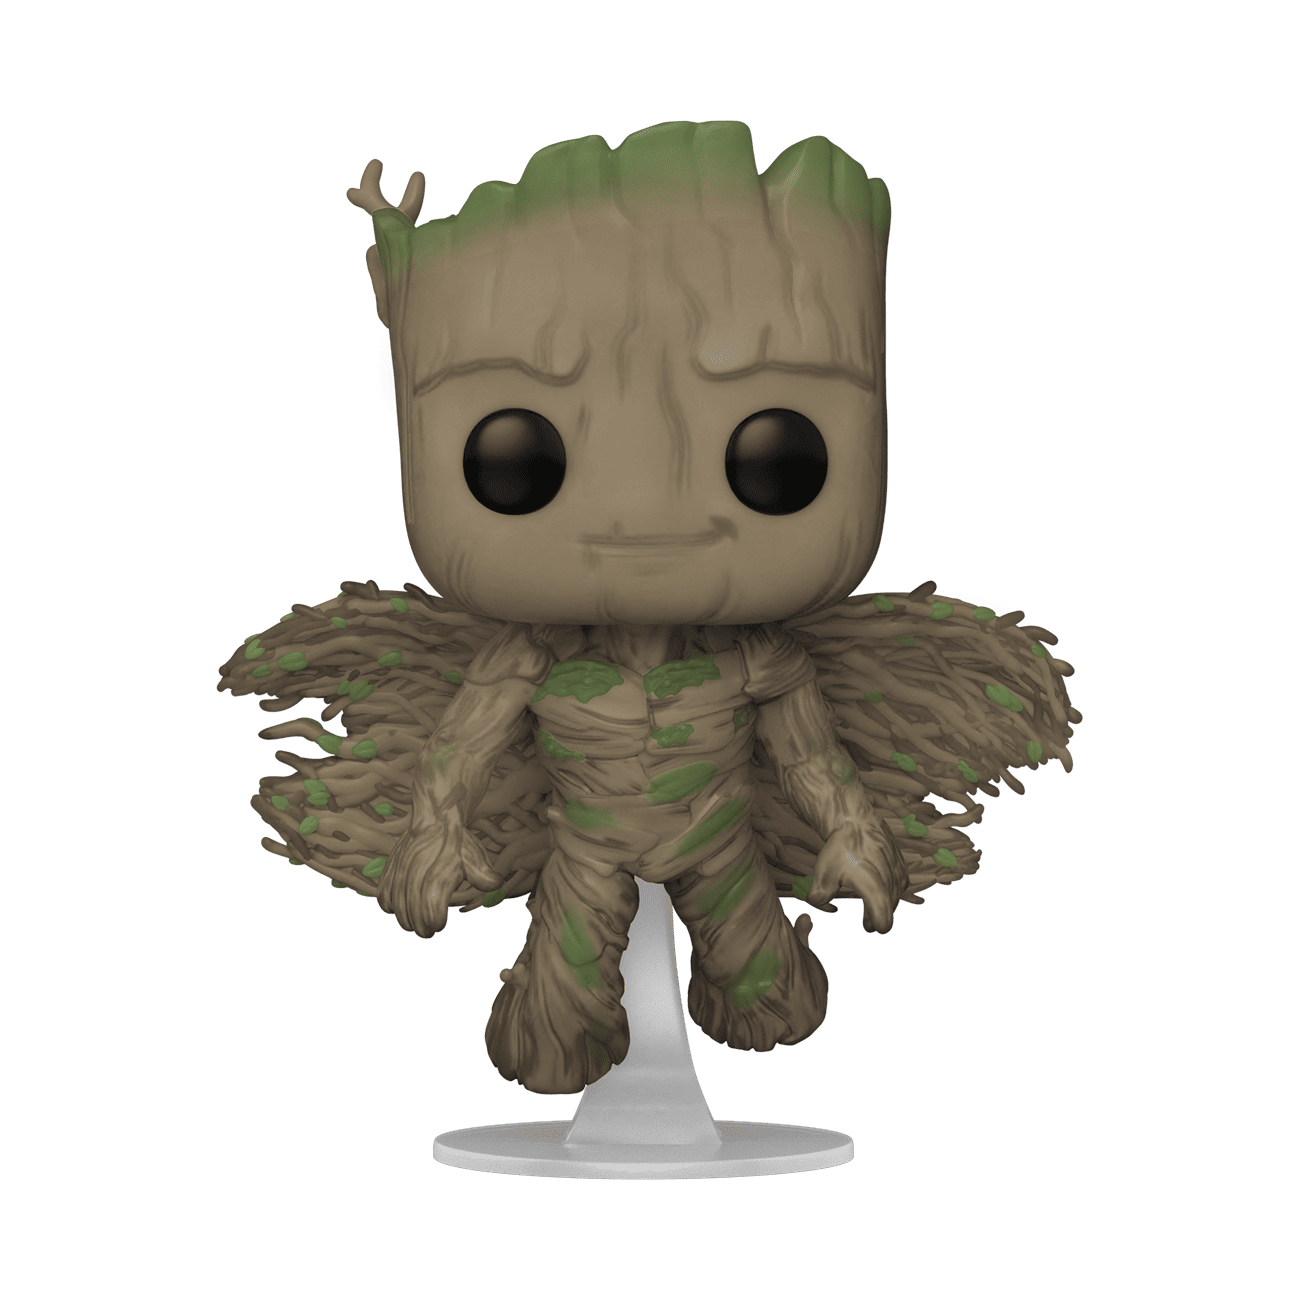 Buy Pop! Groot with Wings at Funko.